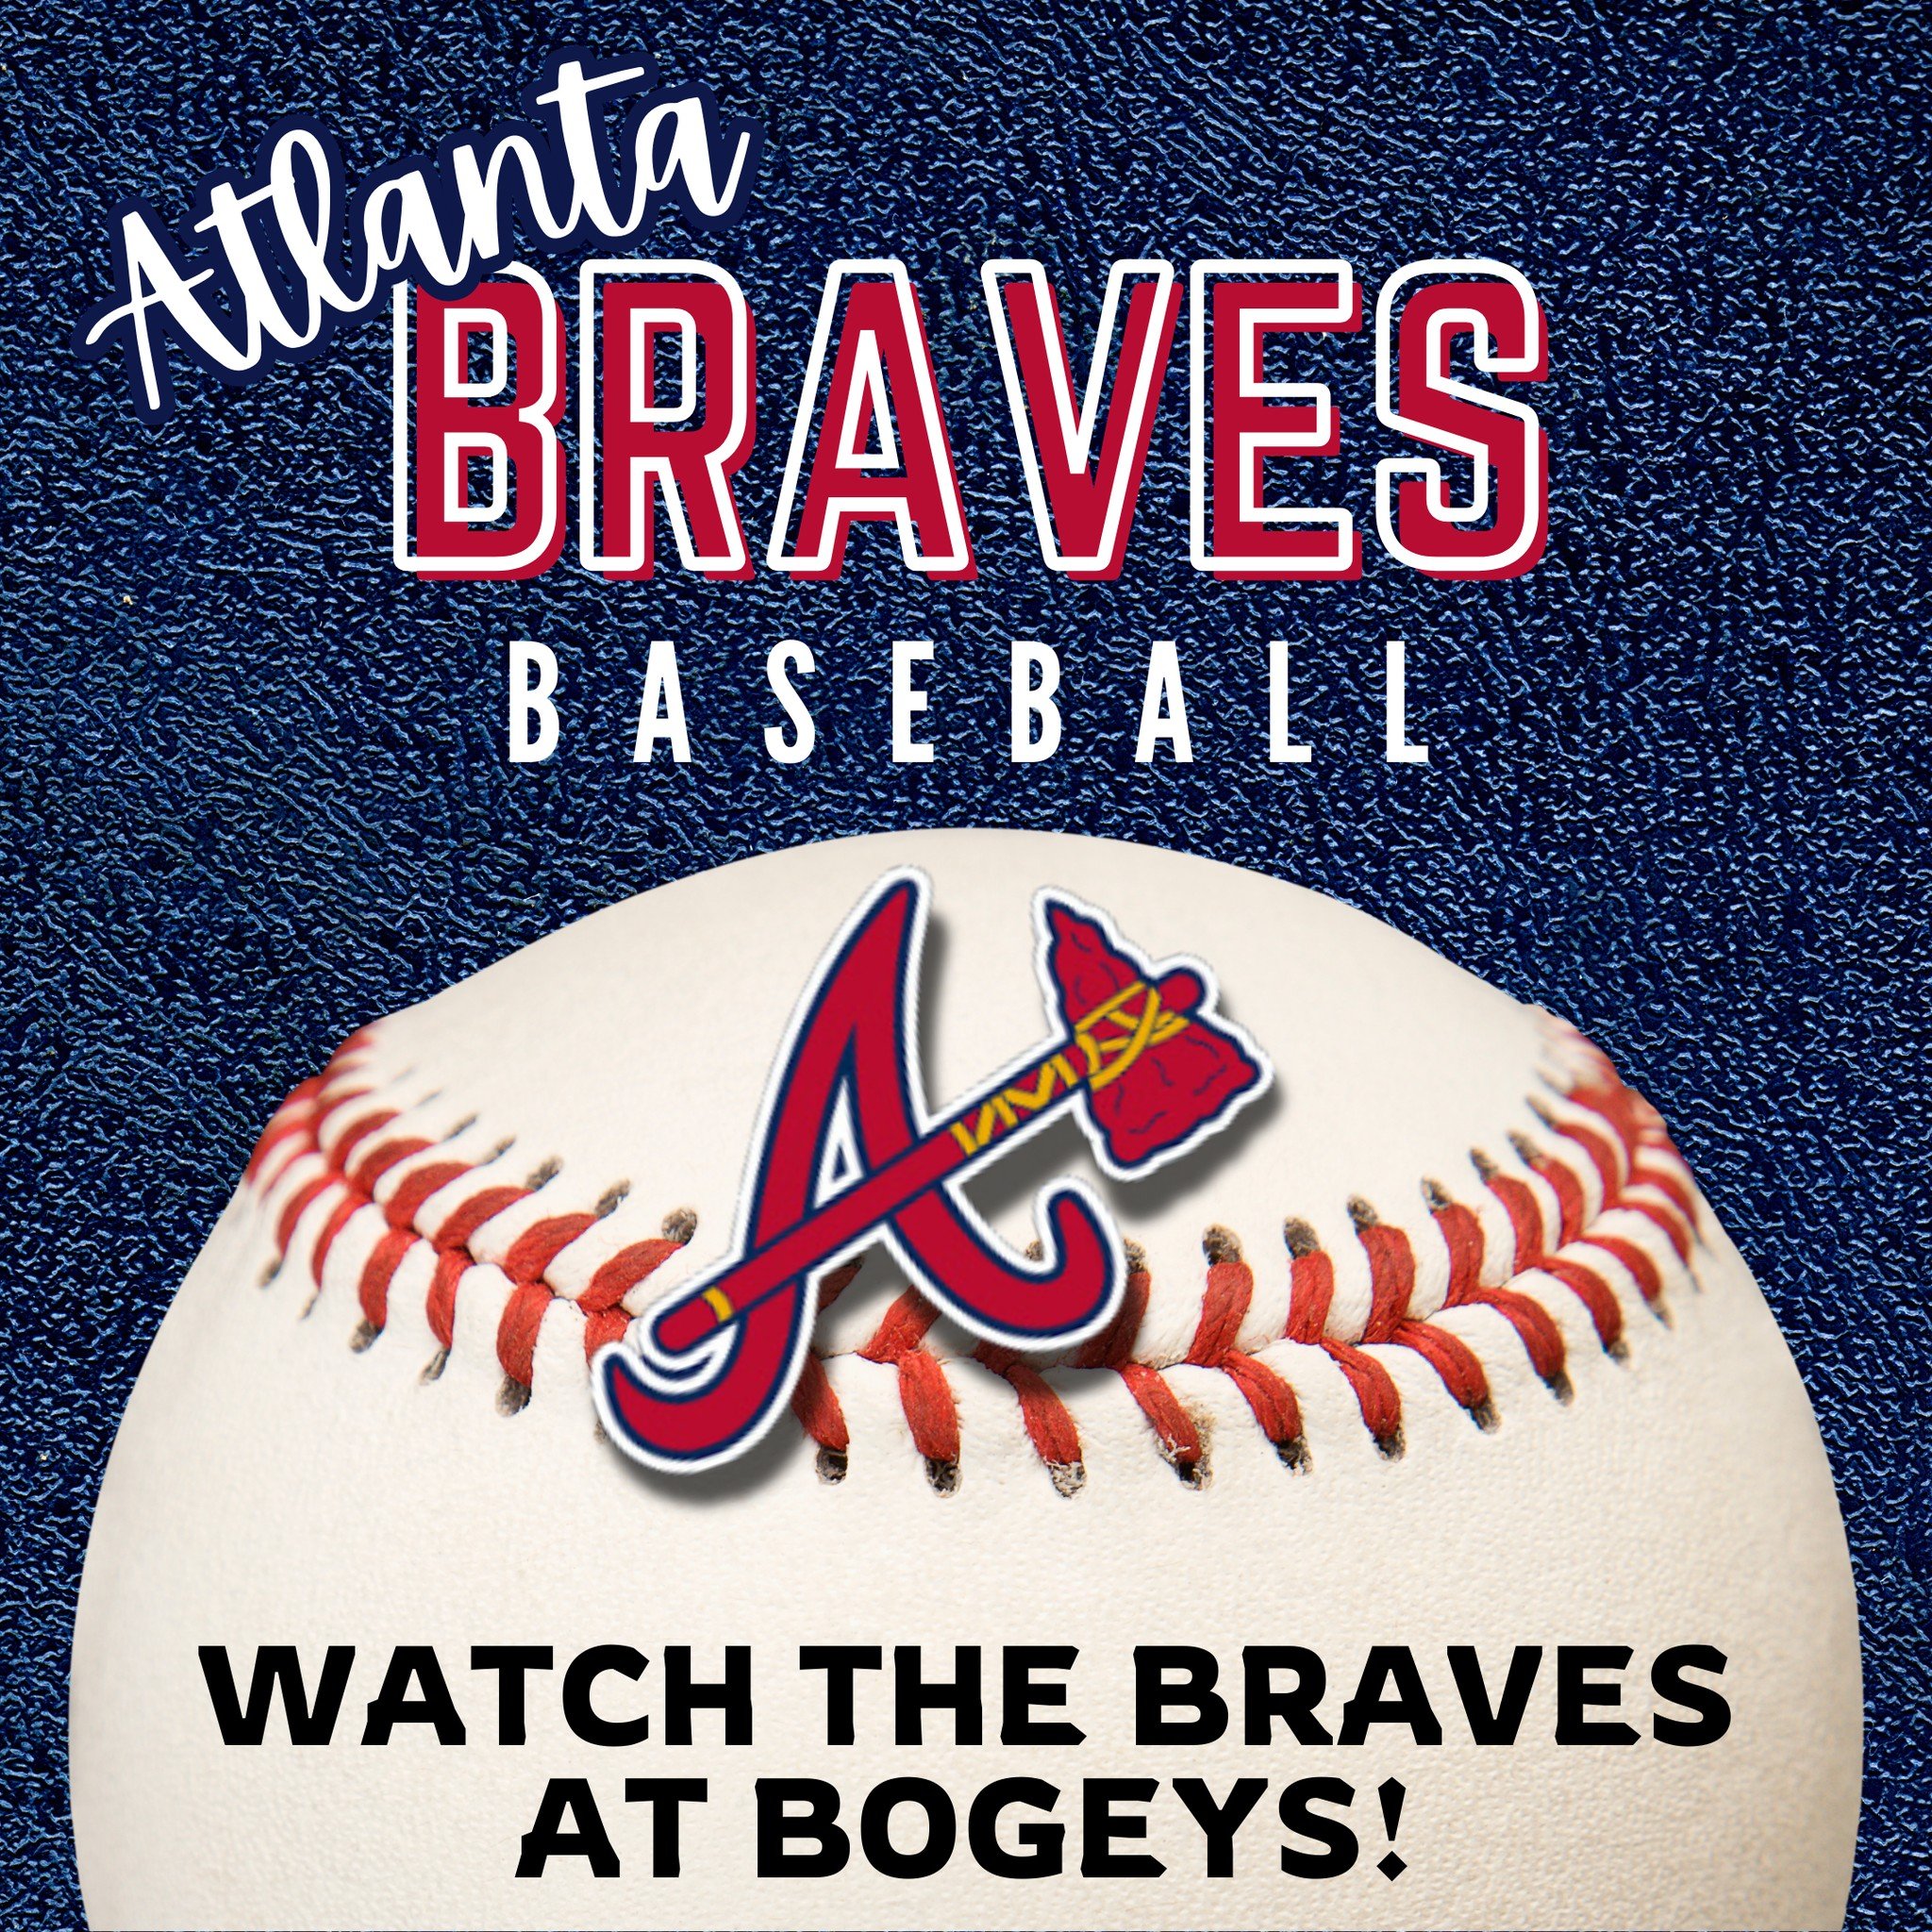 🔥⚾ Want to catch the Braves dominating? Join us at Bogeys! With tons of TVs, you won't miss a single play! ⚾🔥
#BravesNation #sportsbar #baseball #atlantabraves